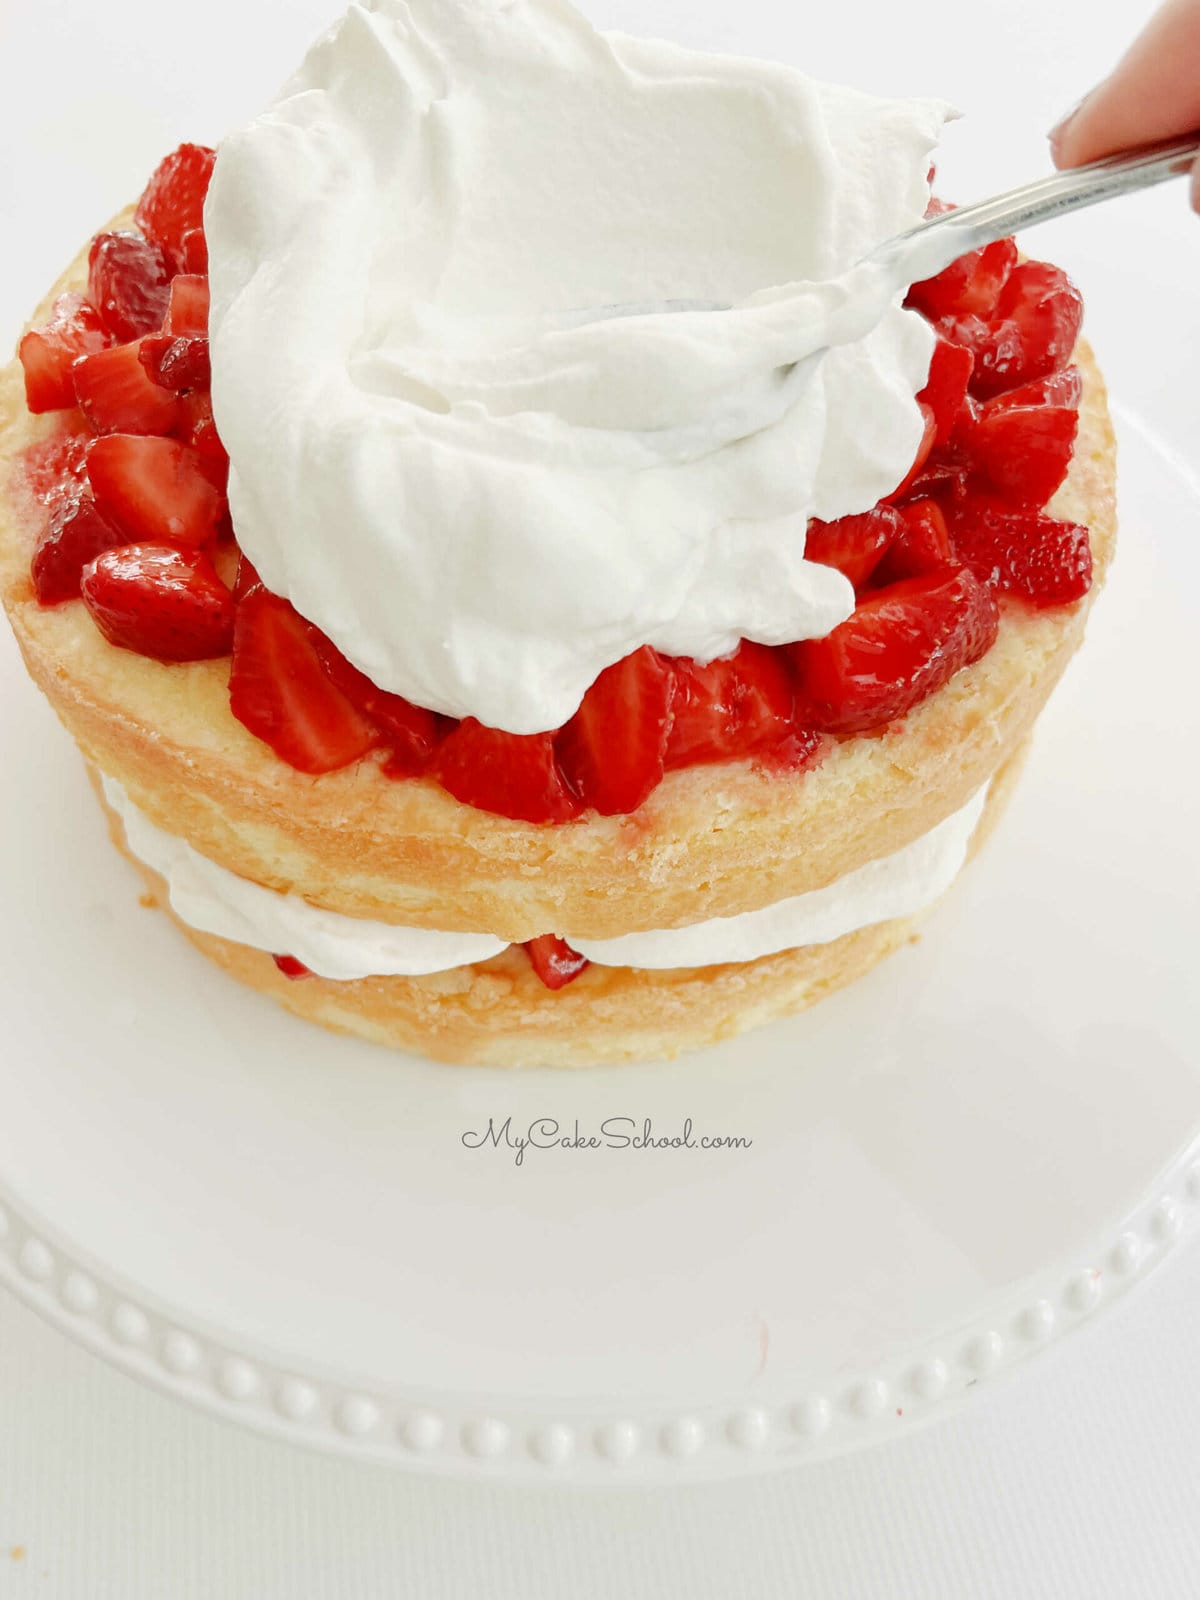 Spreading whipped cream over strawberries and pound cake